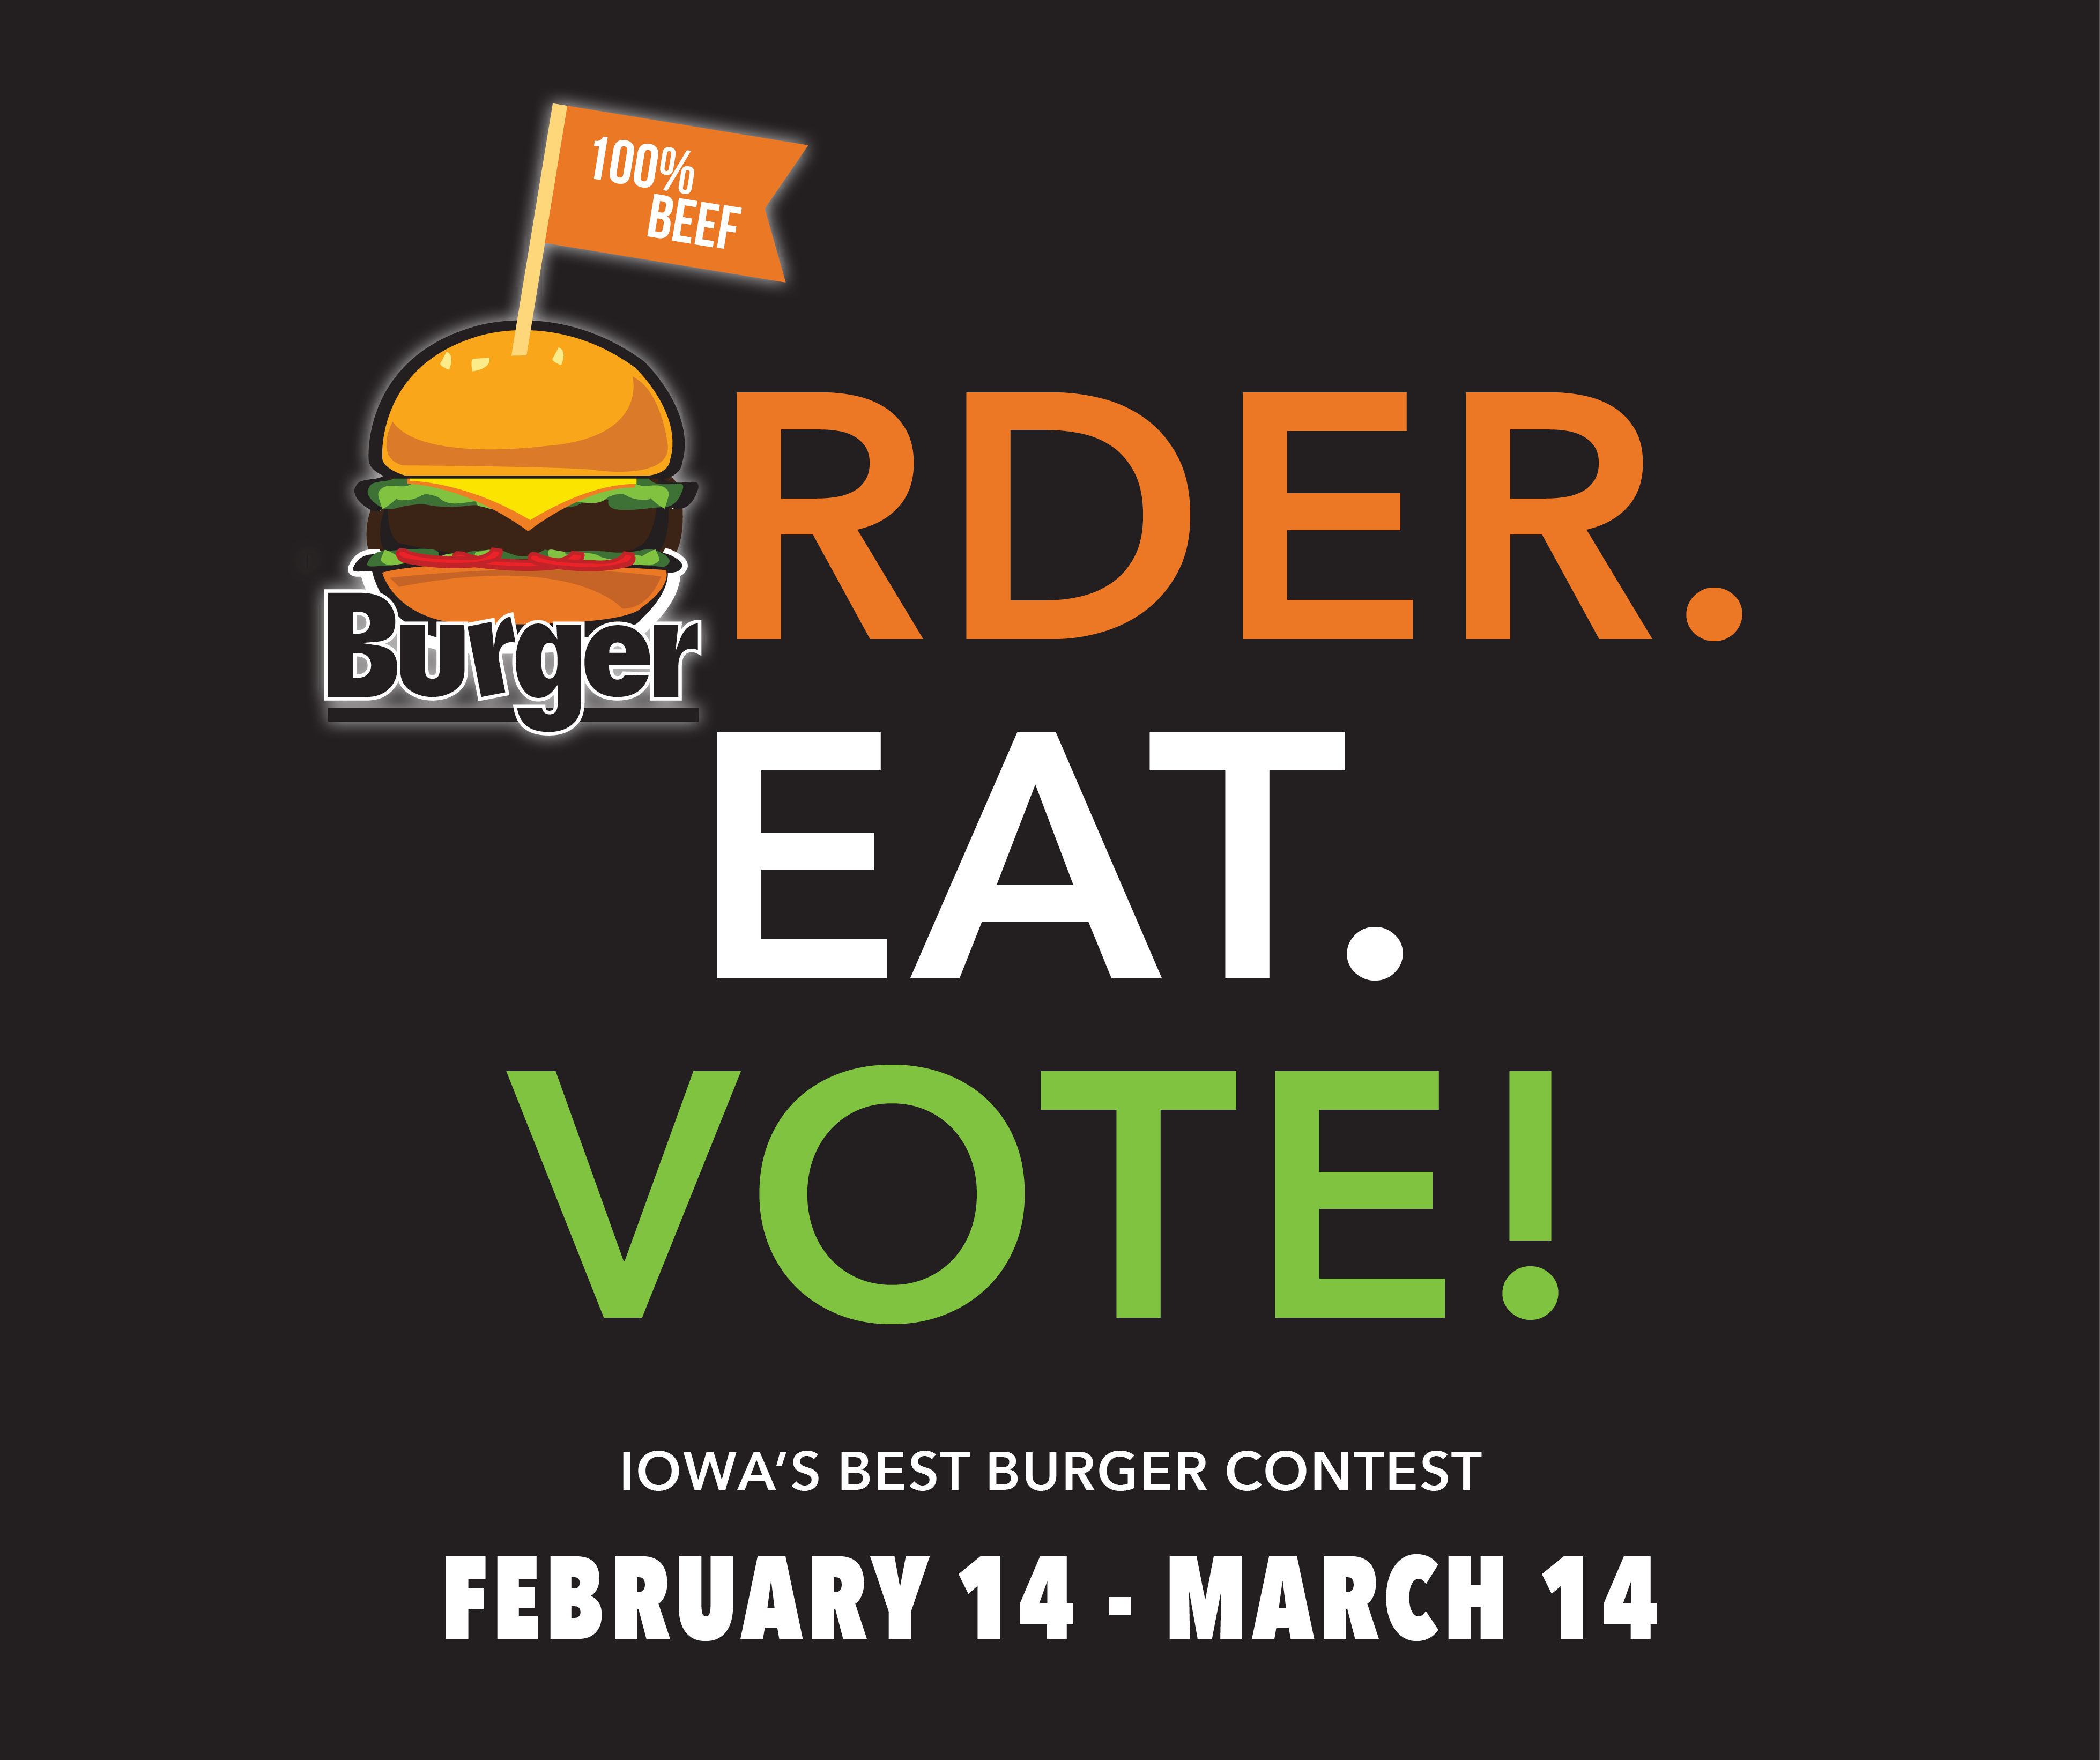 Last Call to Vote for Iowa’s Best Burger Contest